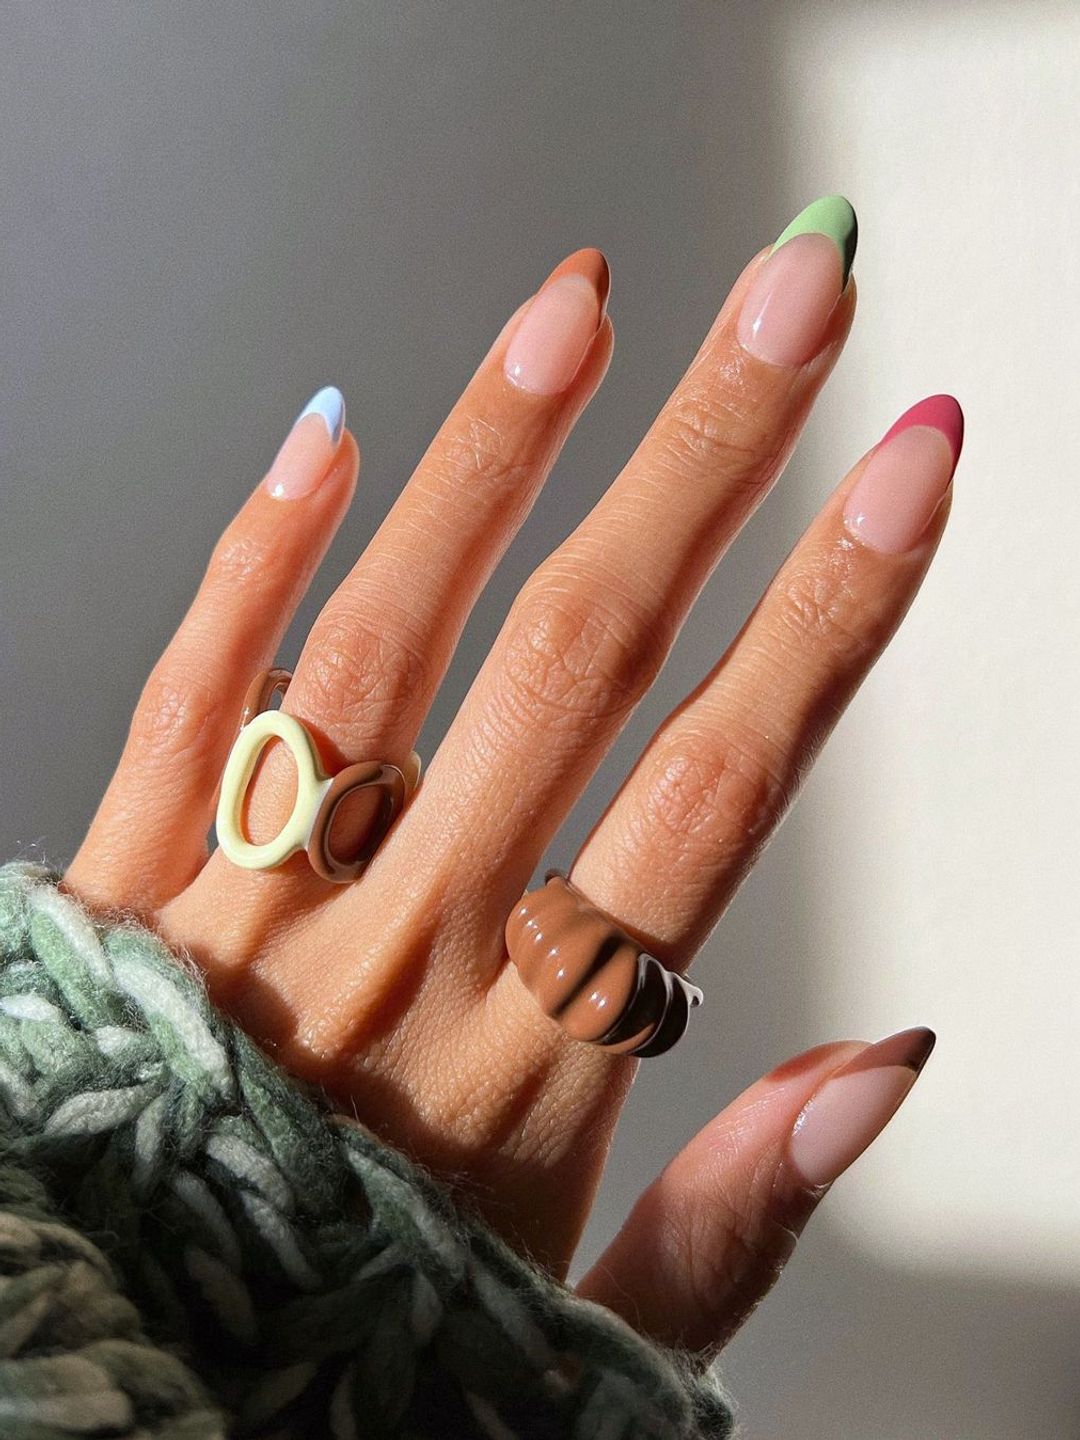 Oval pastel French manicure by @overglowedit